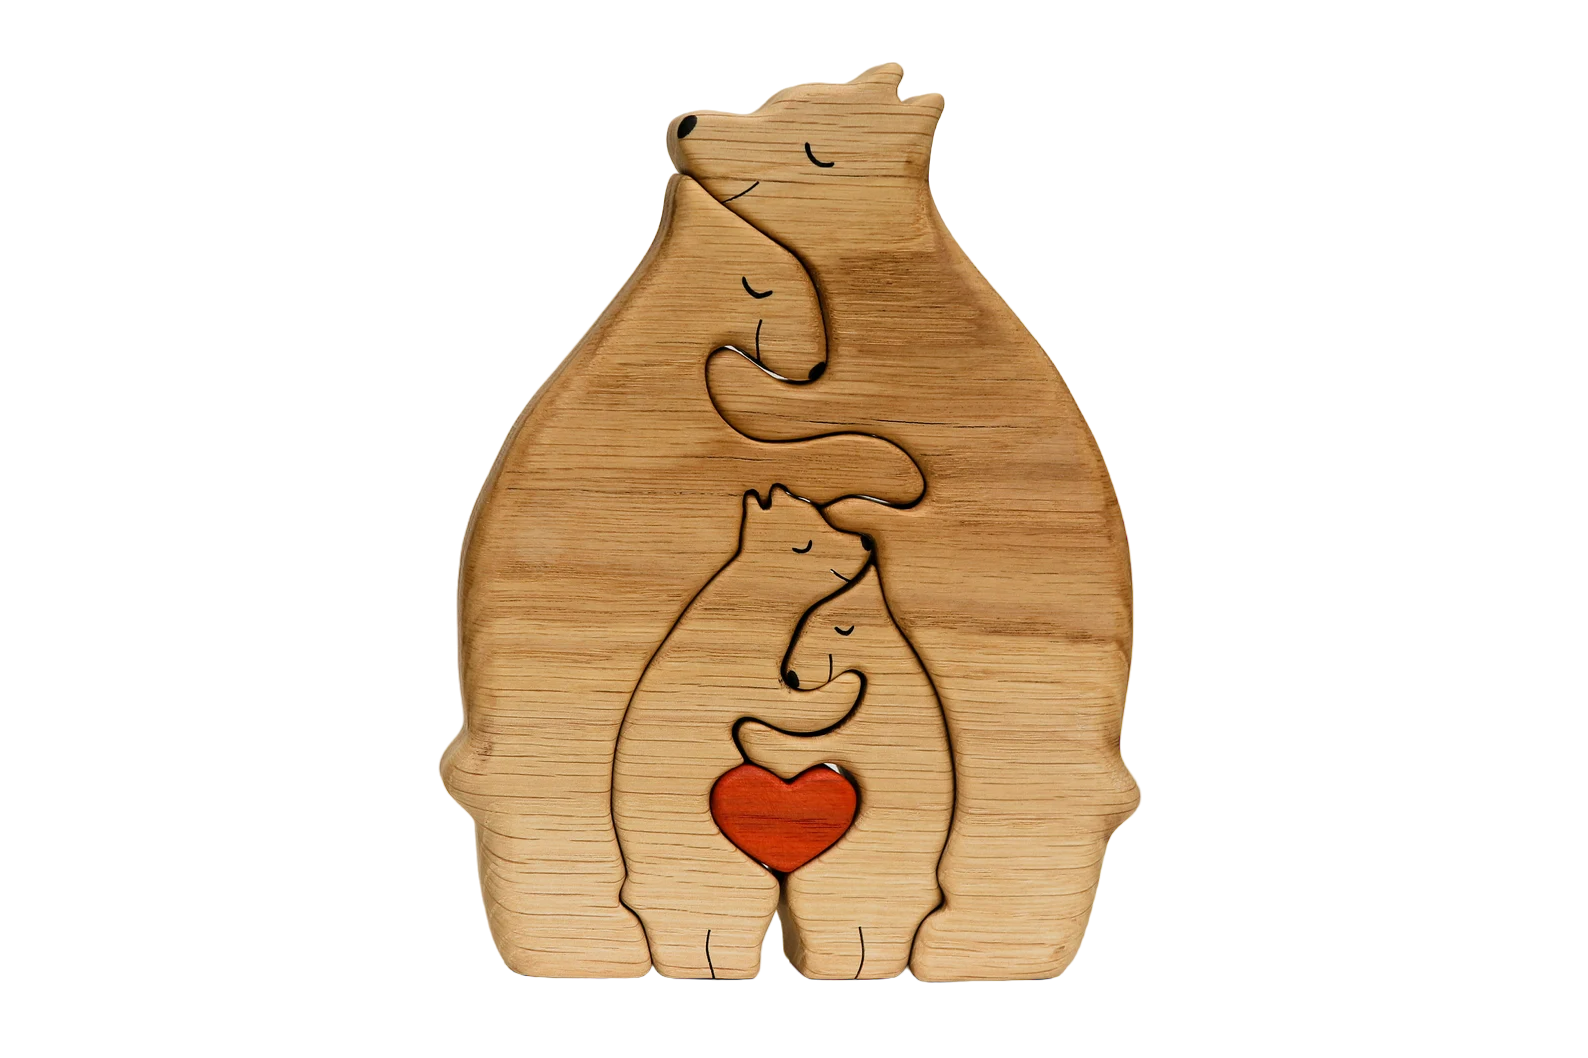 Handcrafted Wooden Family of Bears Hugging Figurine - Unique Wood Puzzle for Pregnancy Announcements, Weddings, and Home Decor